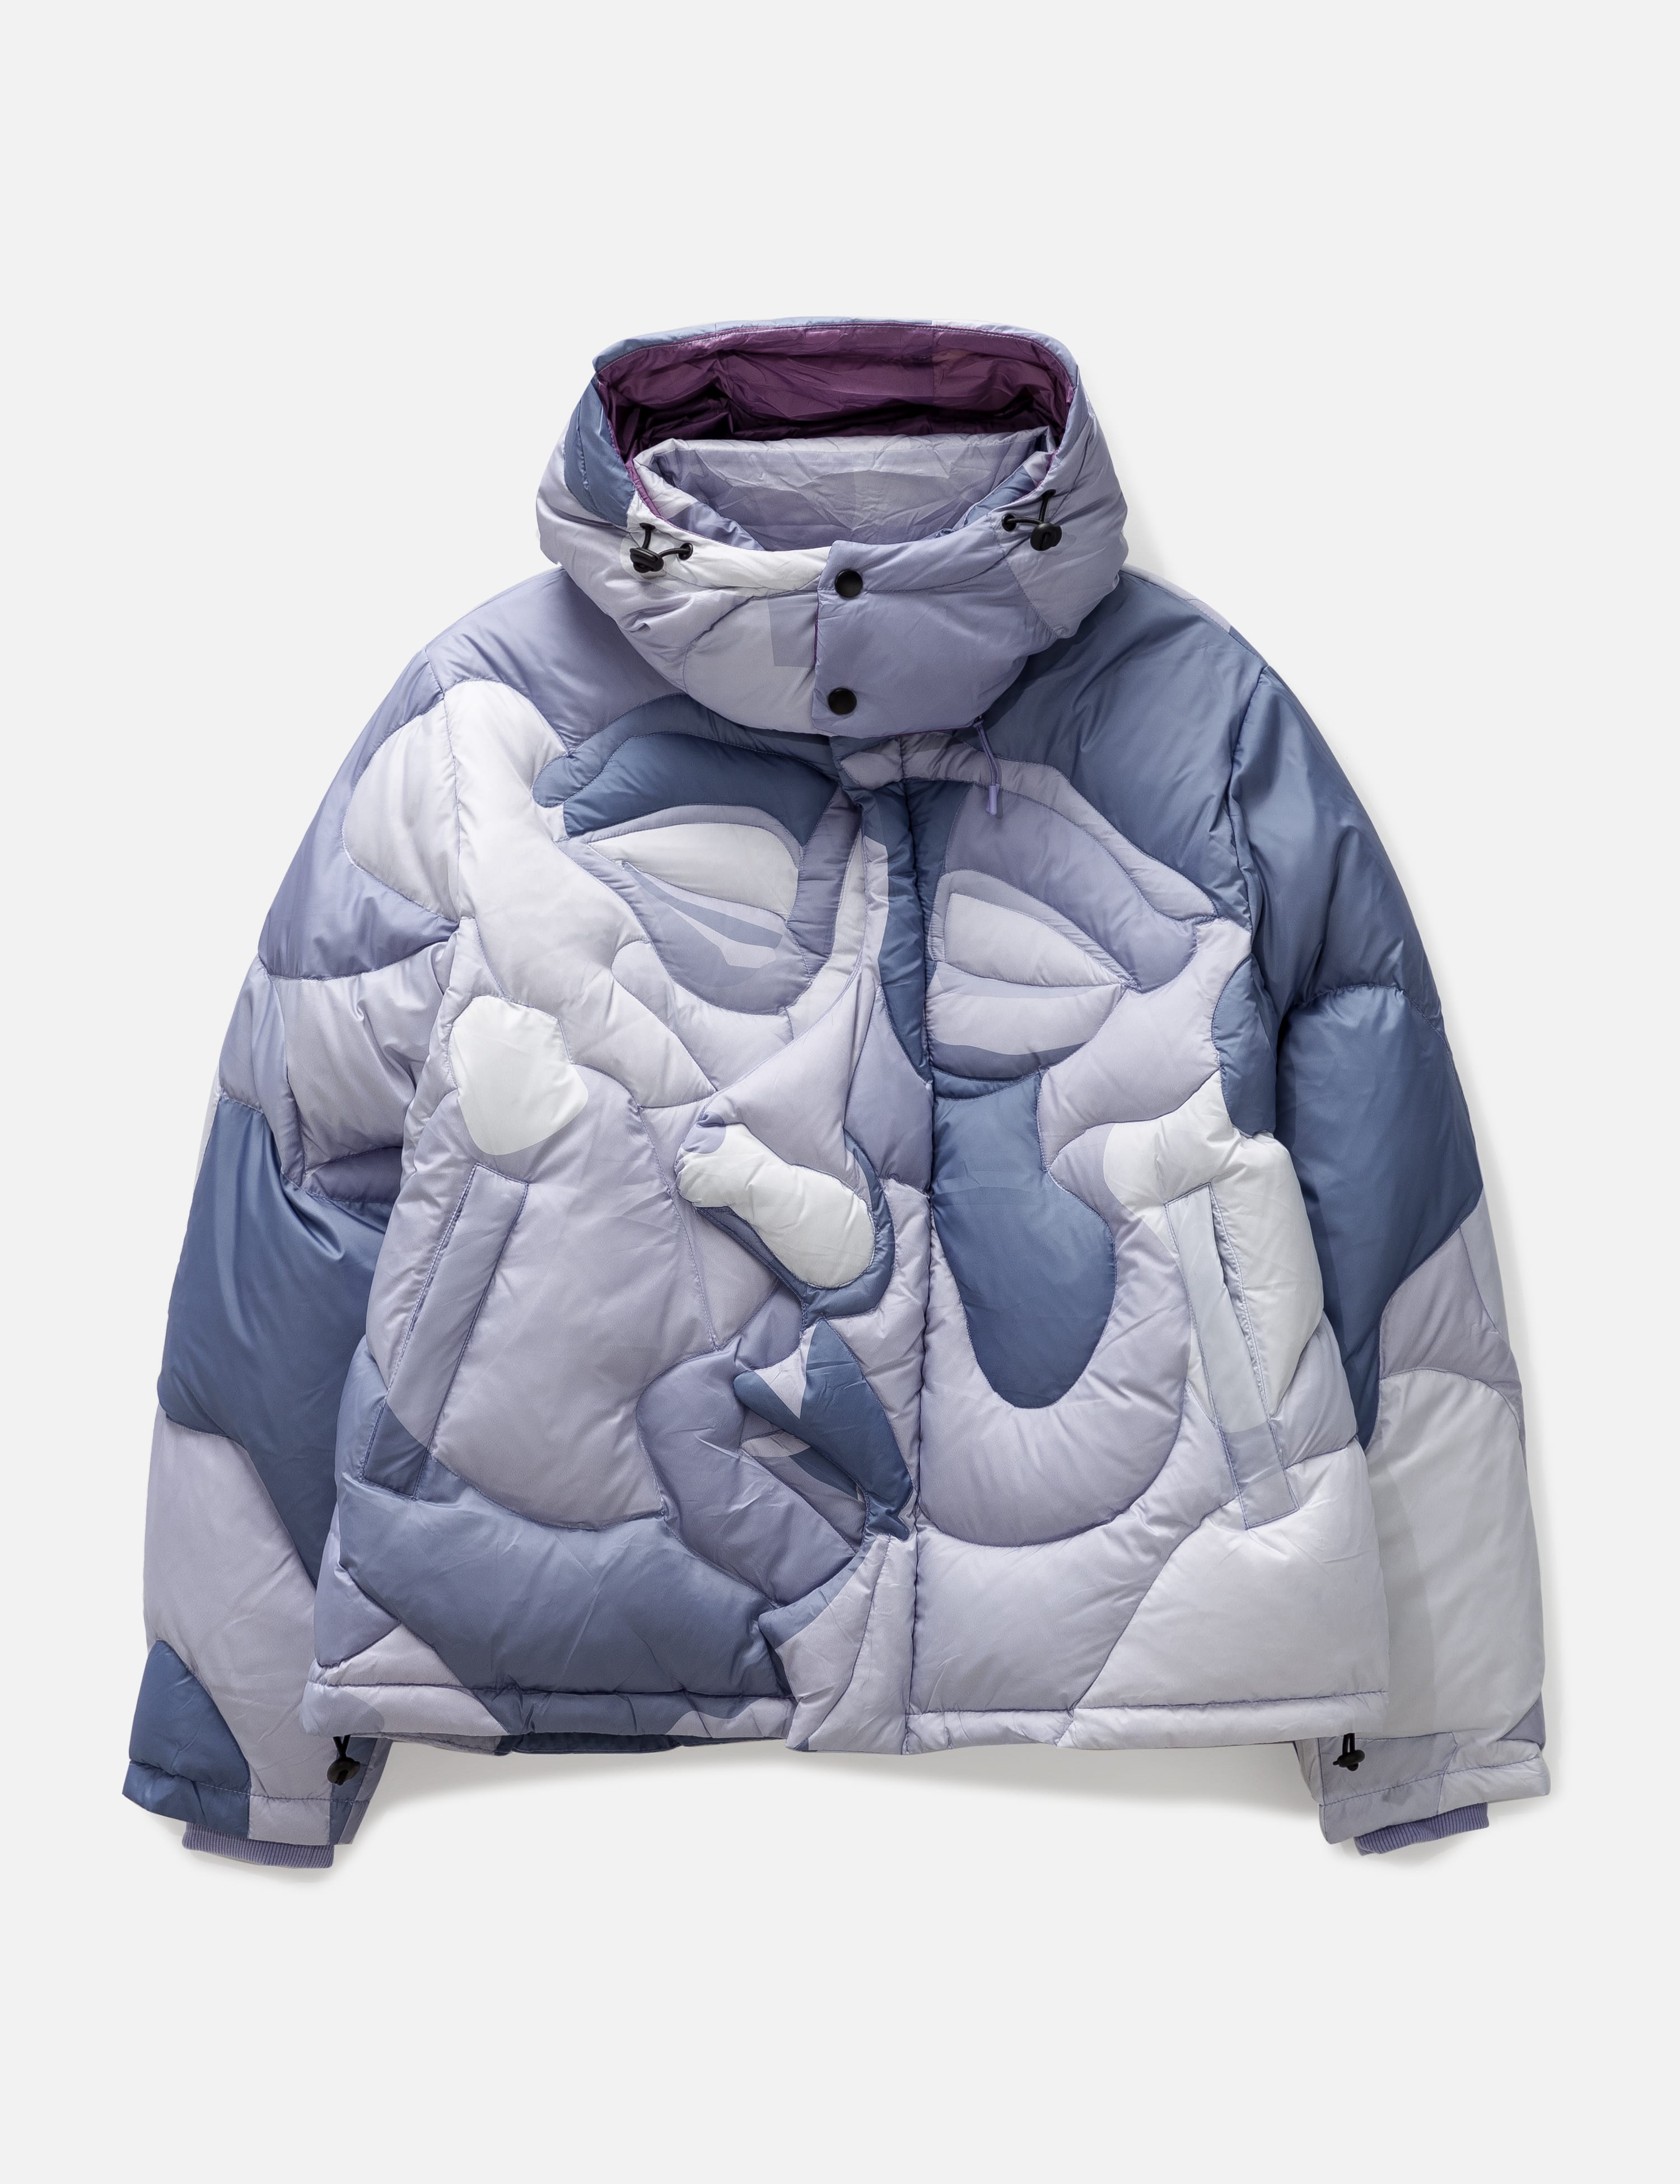 KidSuper - Kissing Puffer Jacket | HBX - Globally Curated Fashion